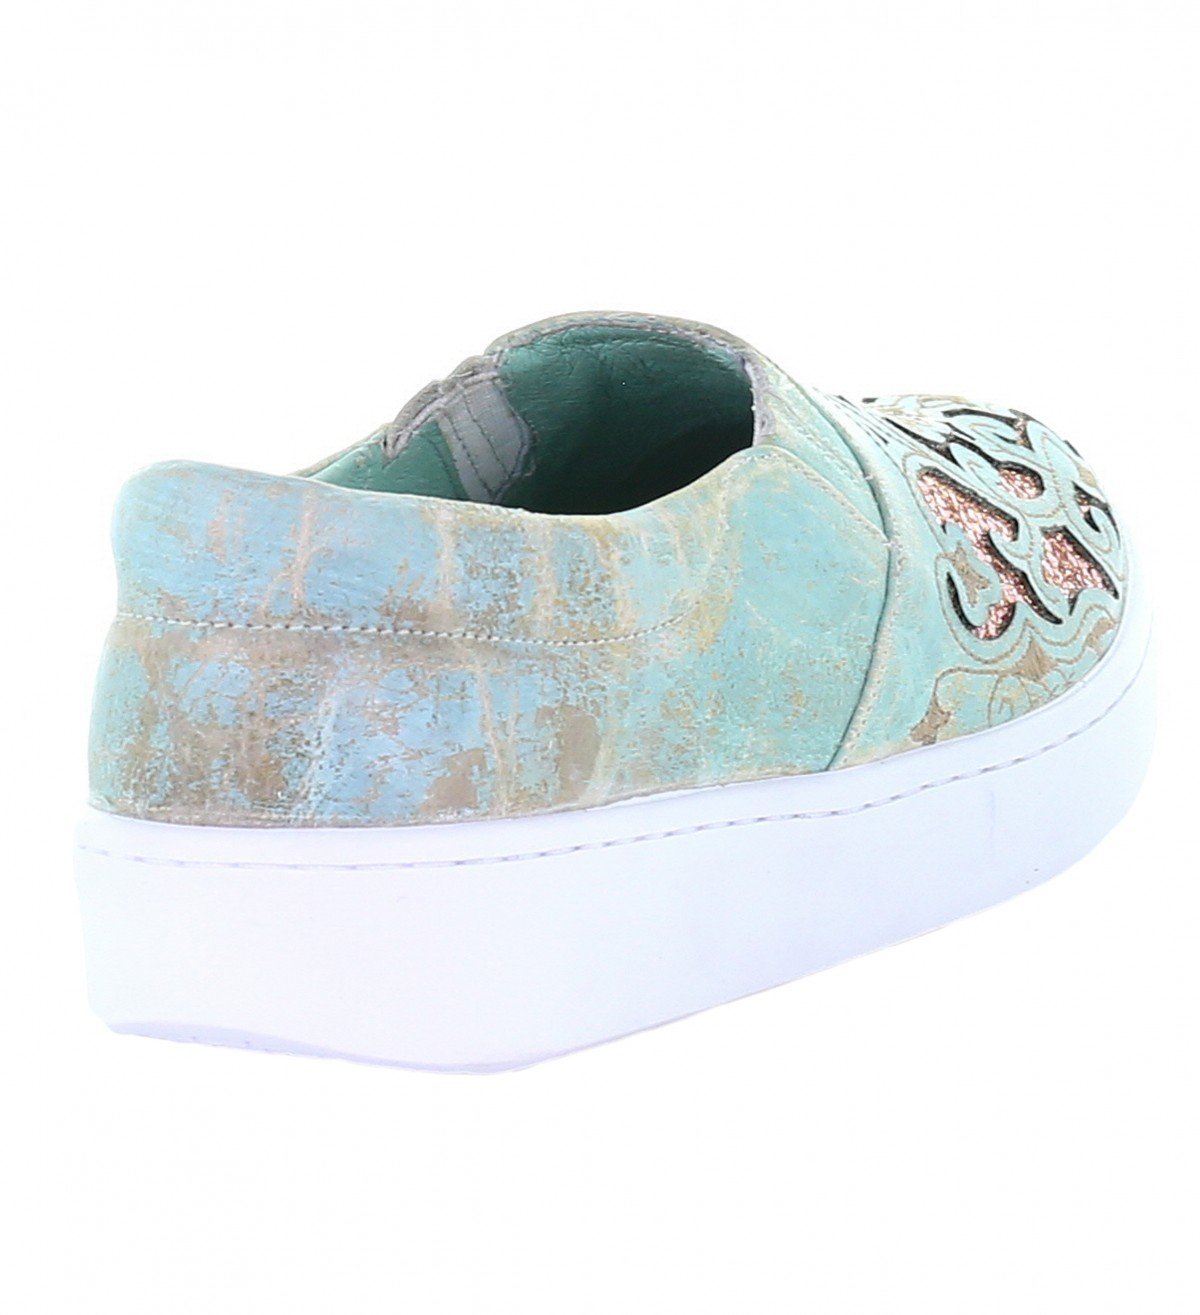 E1564 Corral Women's Turquoise / Pink Inlay & Embroidery Sneaker